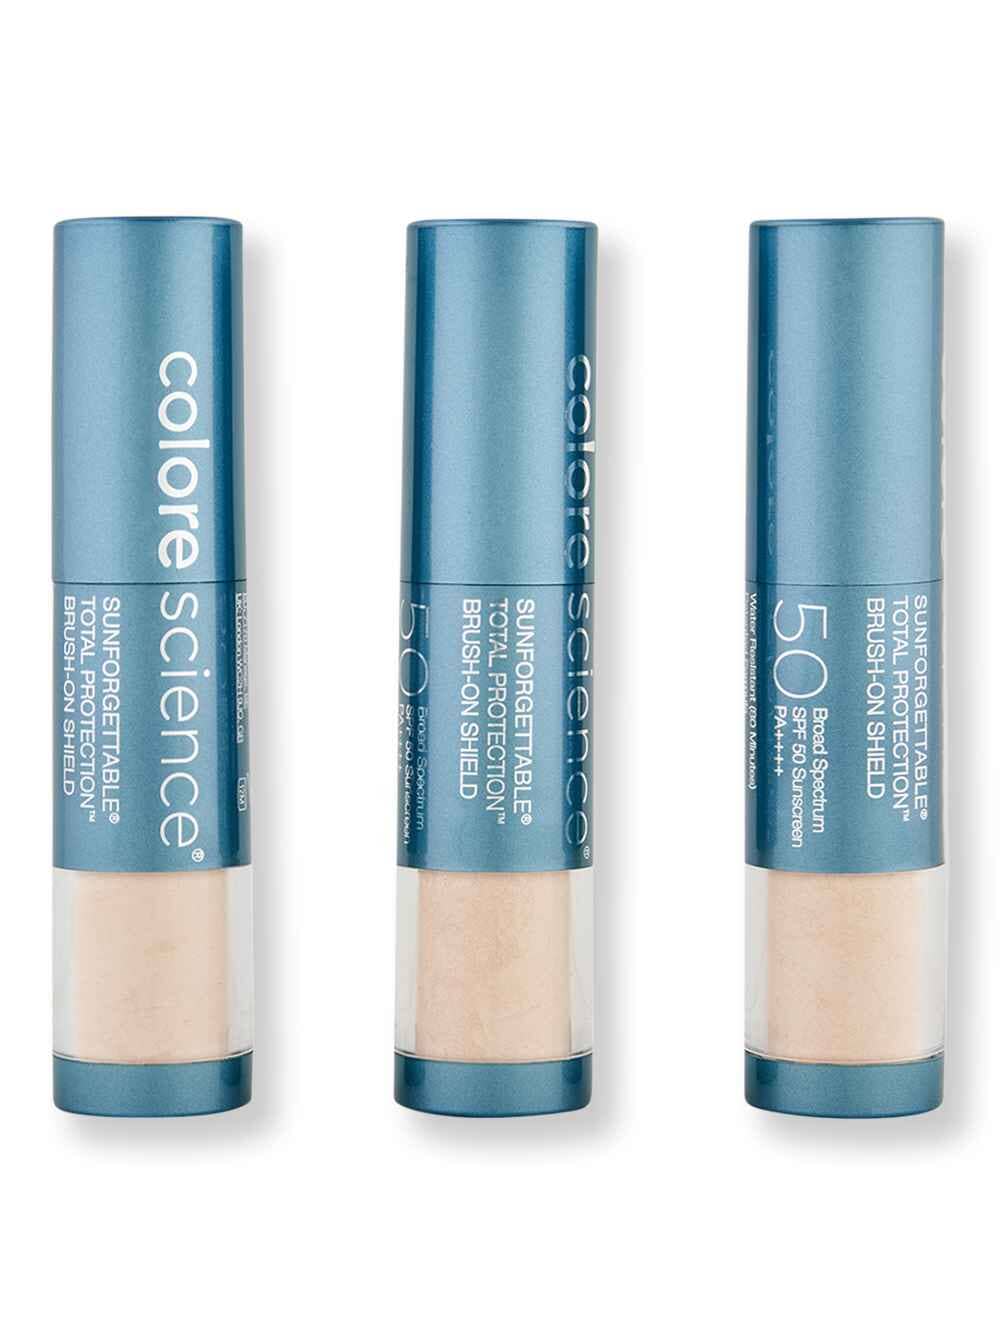 ColoreScience ColoreScience Sunforgettable Total Protection Brush-On Shield SPF 50 Multipack Fair Body Sunscreens 